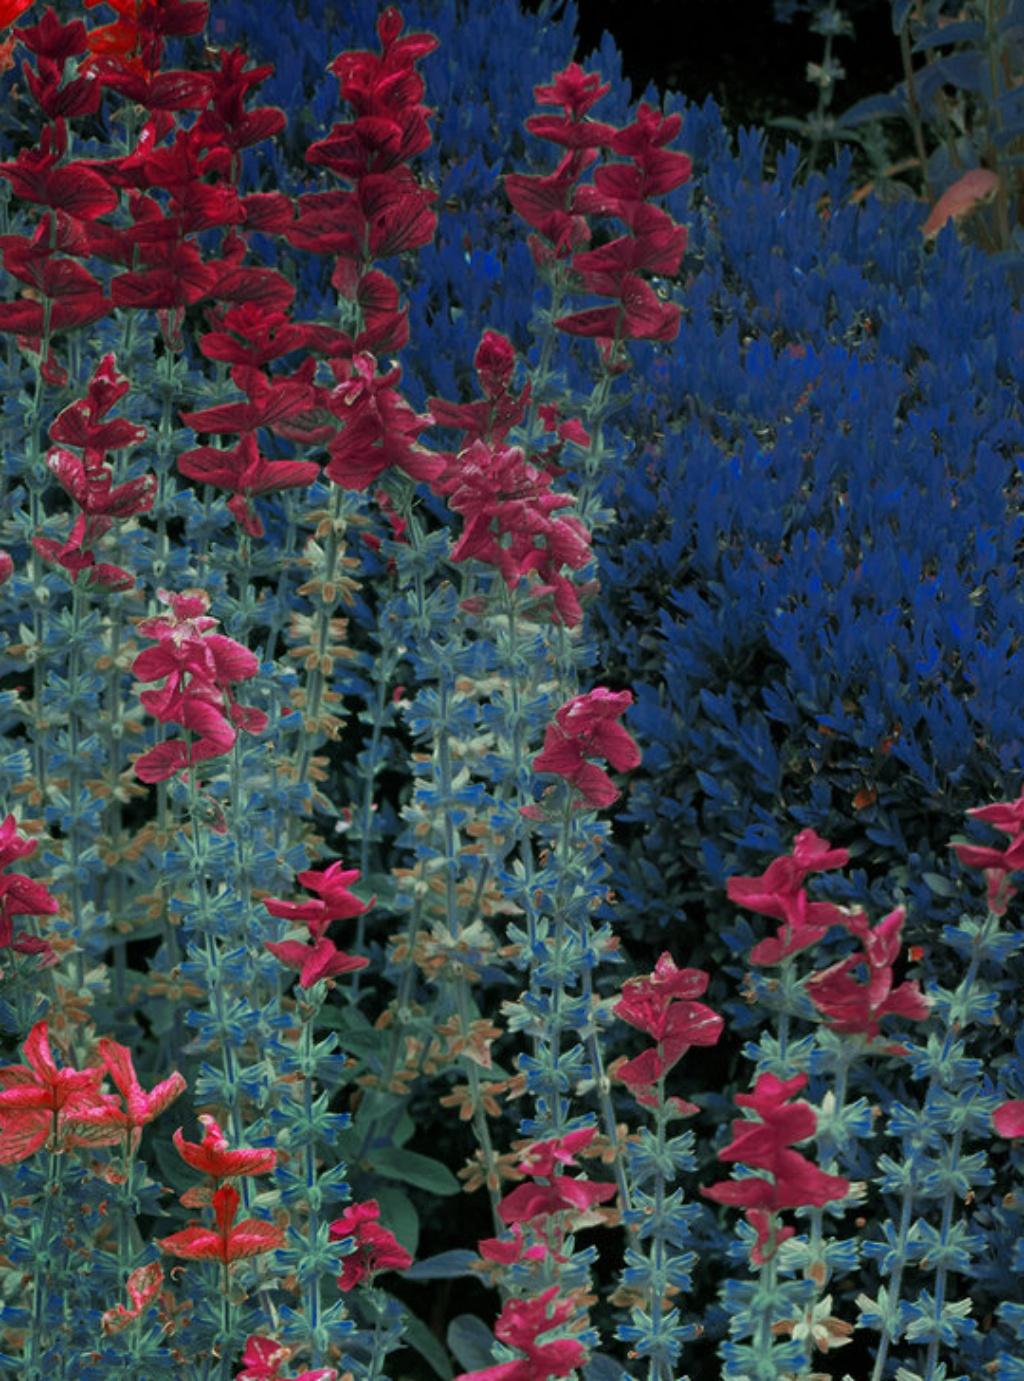 Erik MADIGAN HECK (*1983, United States)
Red Snapping Dragons, The Garden, 2019
Chromogenic print
Sheet 101.6 x 76.2 cm (40 x 30 in.)
Edition of 9, plus 2 AP; Ed. no. 2/9
Print only


Originally from Excelsior, Minnesota, Erik Madigan Heck (*1983)